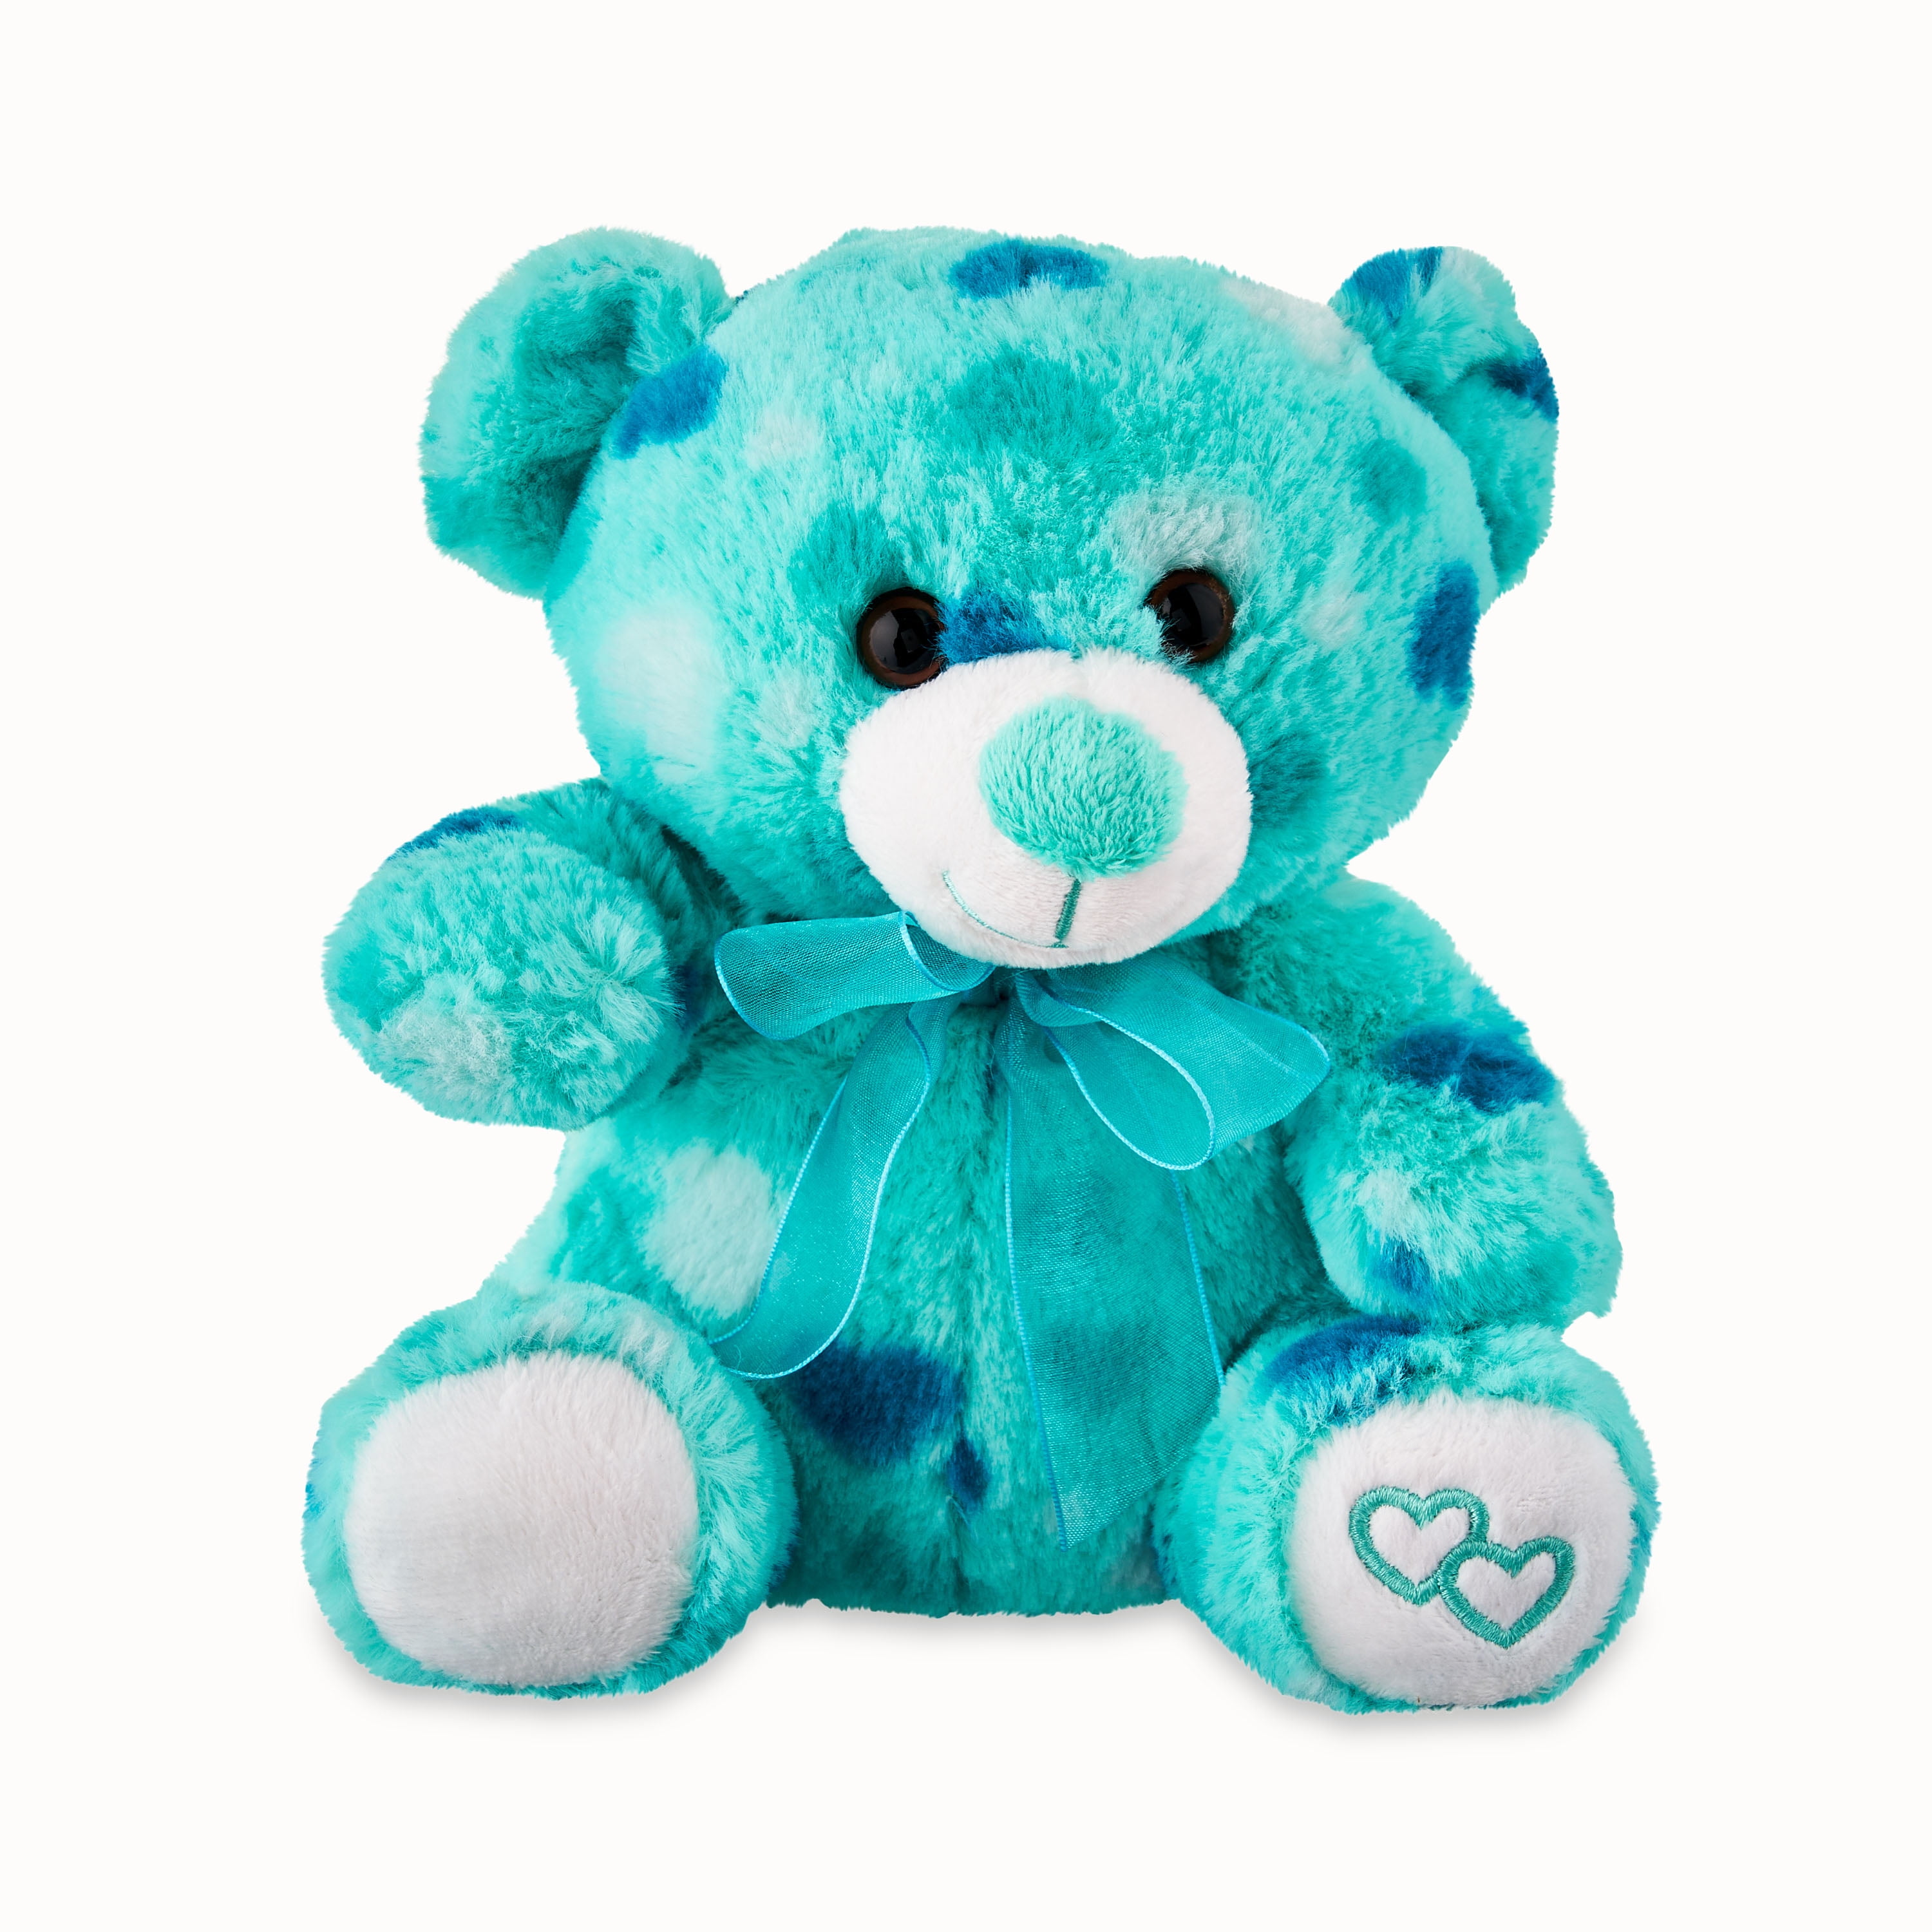 Way to Celebrate! Valentine’s Day 8in Soft Expression Plush Teddy Bear, Teal with Hearts